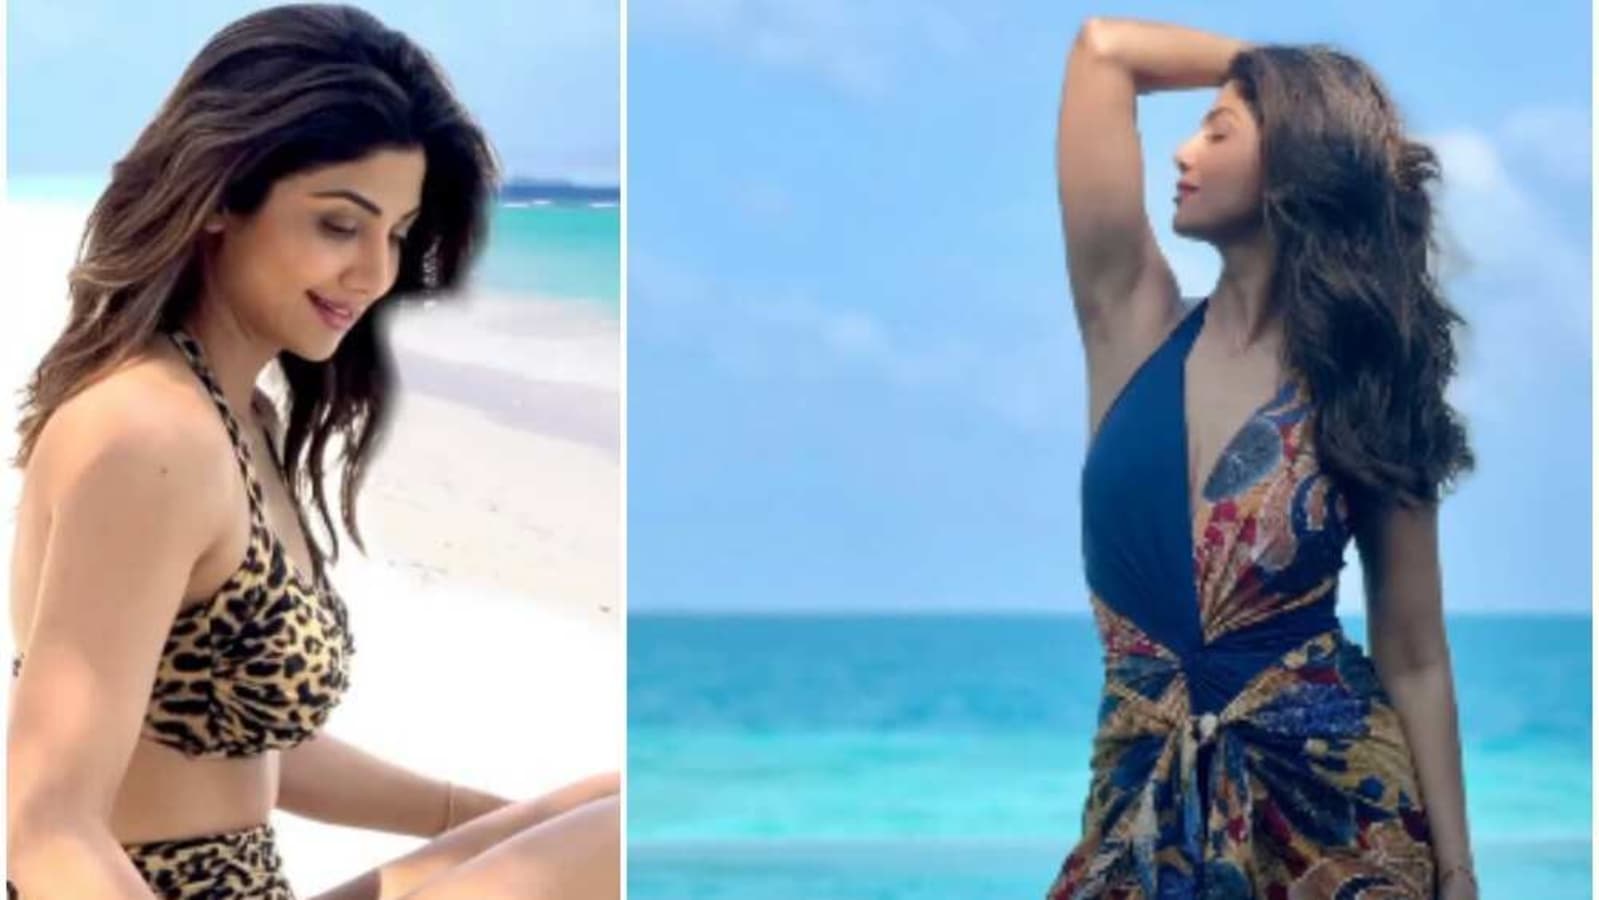 Shilpa Shetty Sex Xnxx - Shilpa Shetty is every bit a diva as she poses by the blue sea in Maldives.  See pics | Bollywood - Hindustan Times